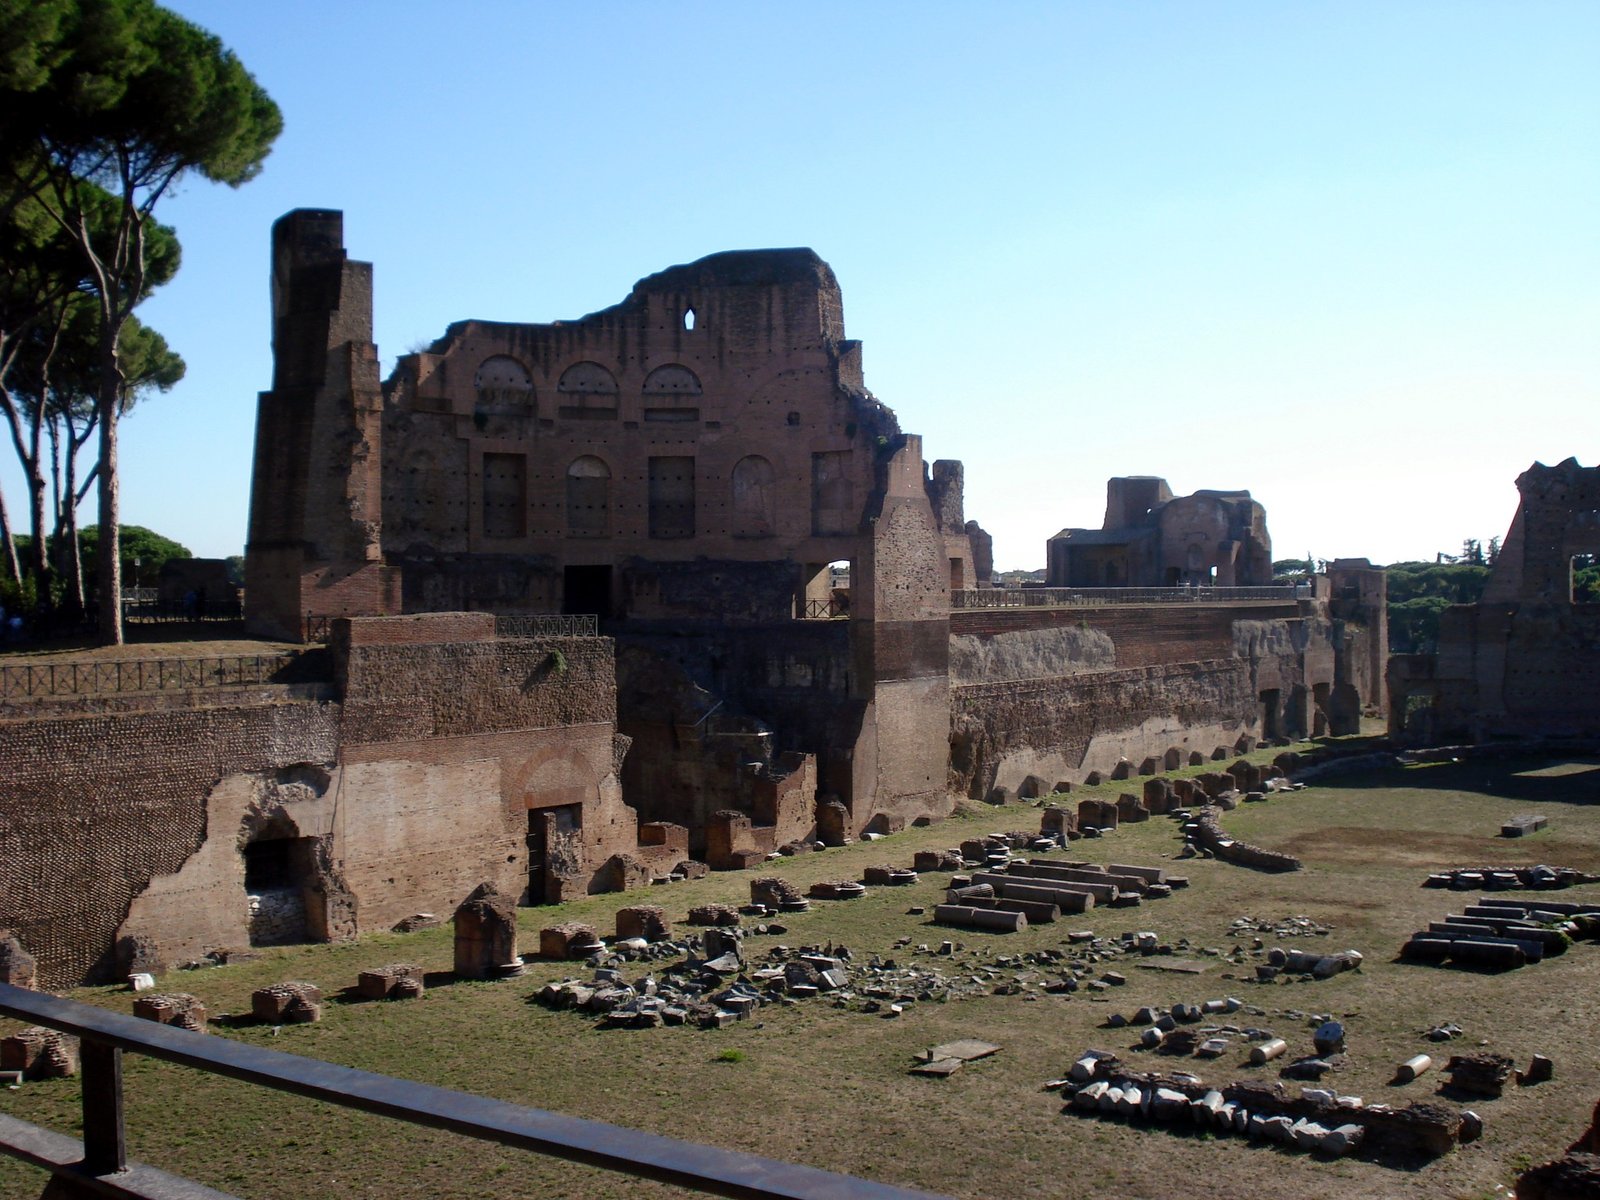 Palatine Hill in Rome, Italy is historical and has the best views of the city.